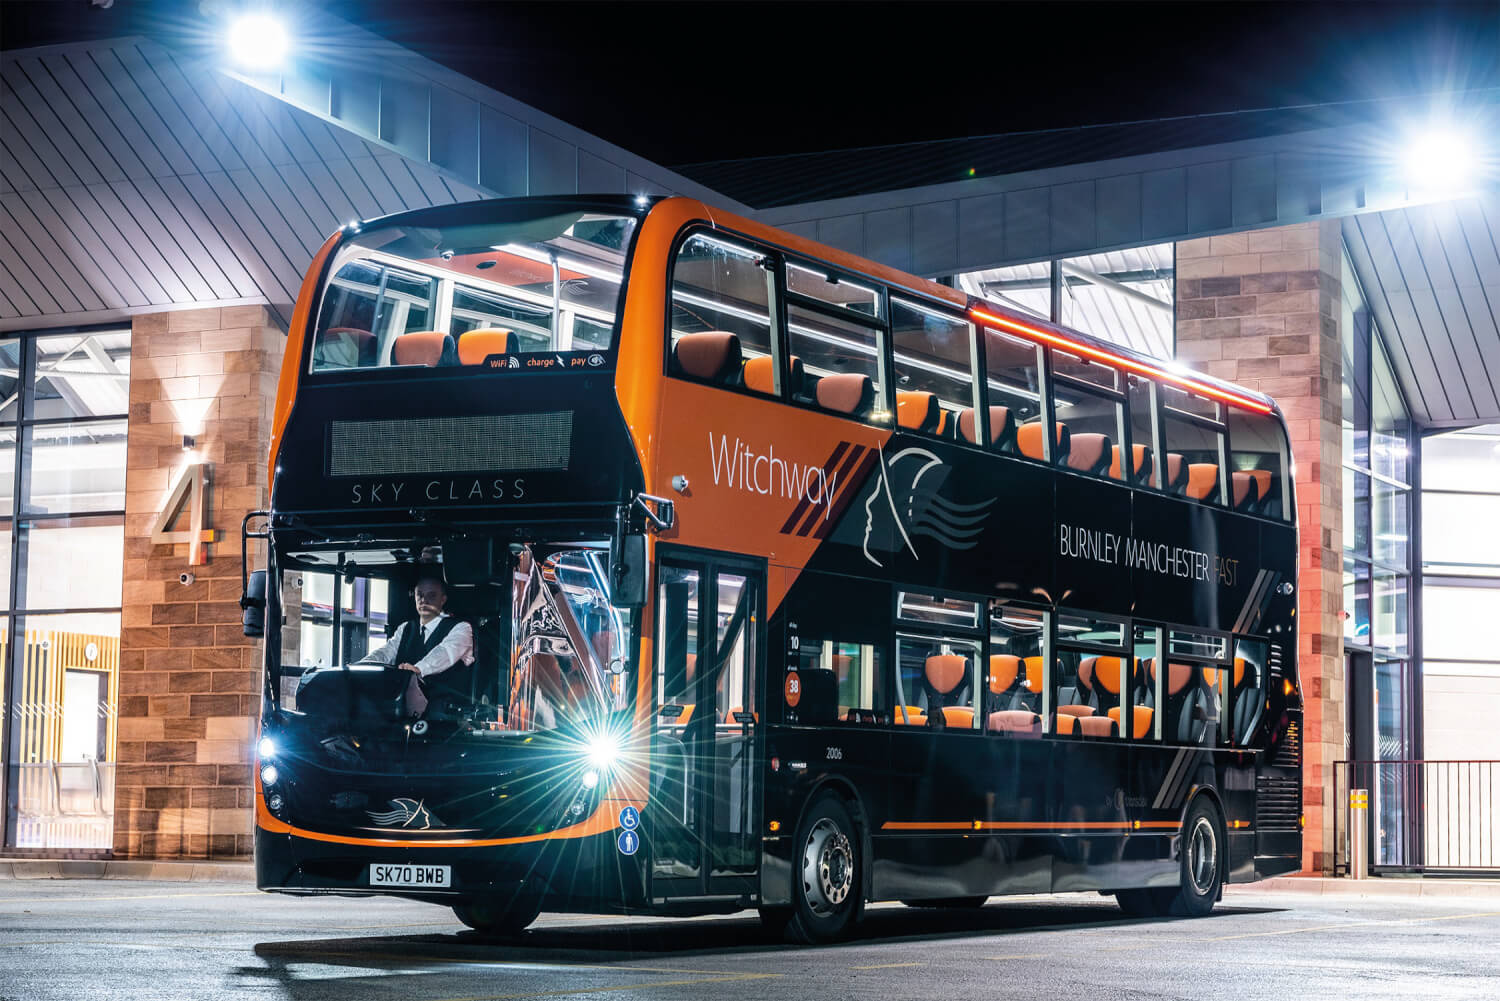 Transdev ‘Witchway’ bus